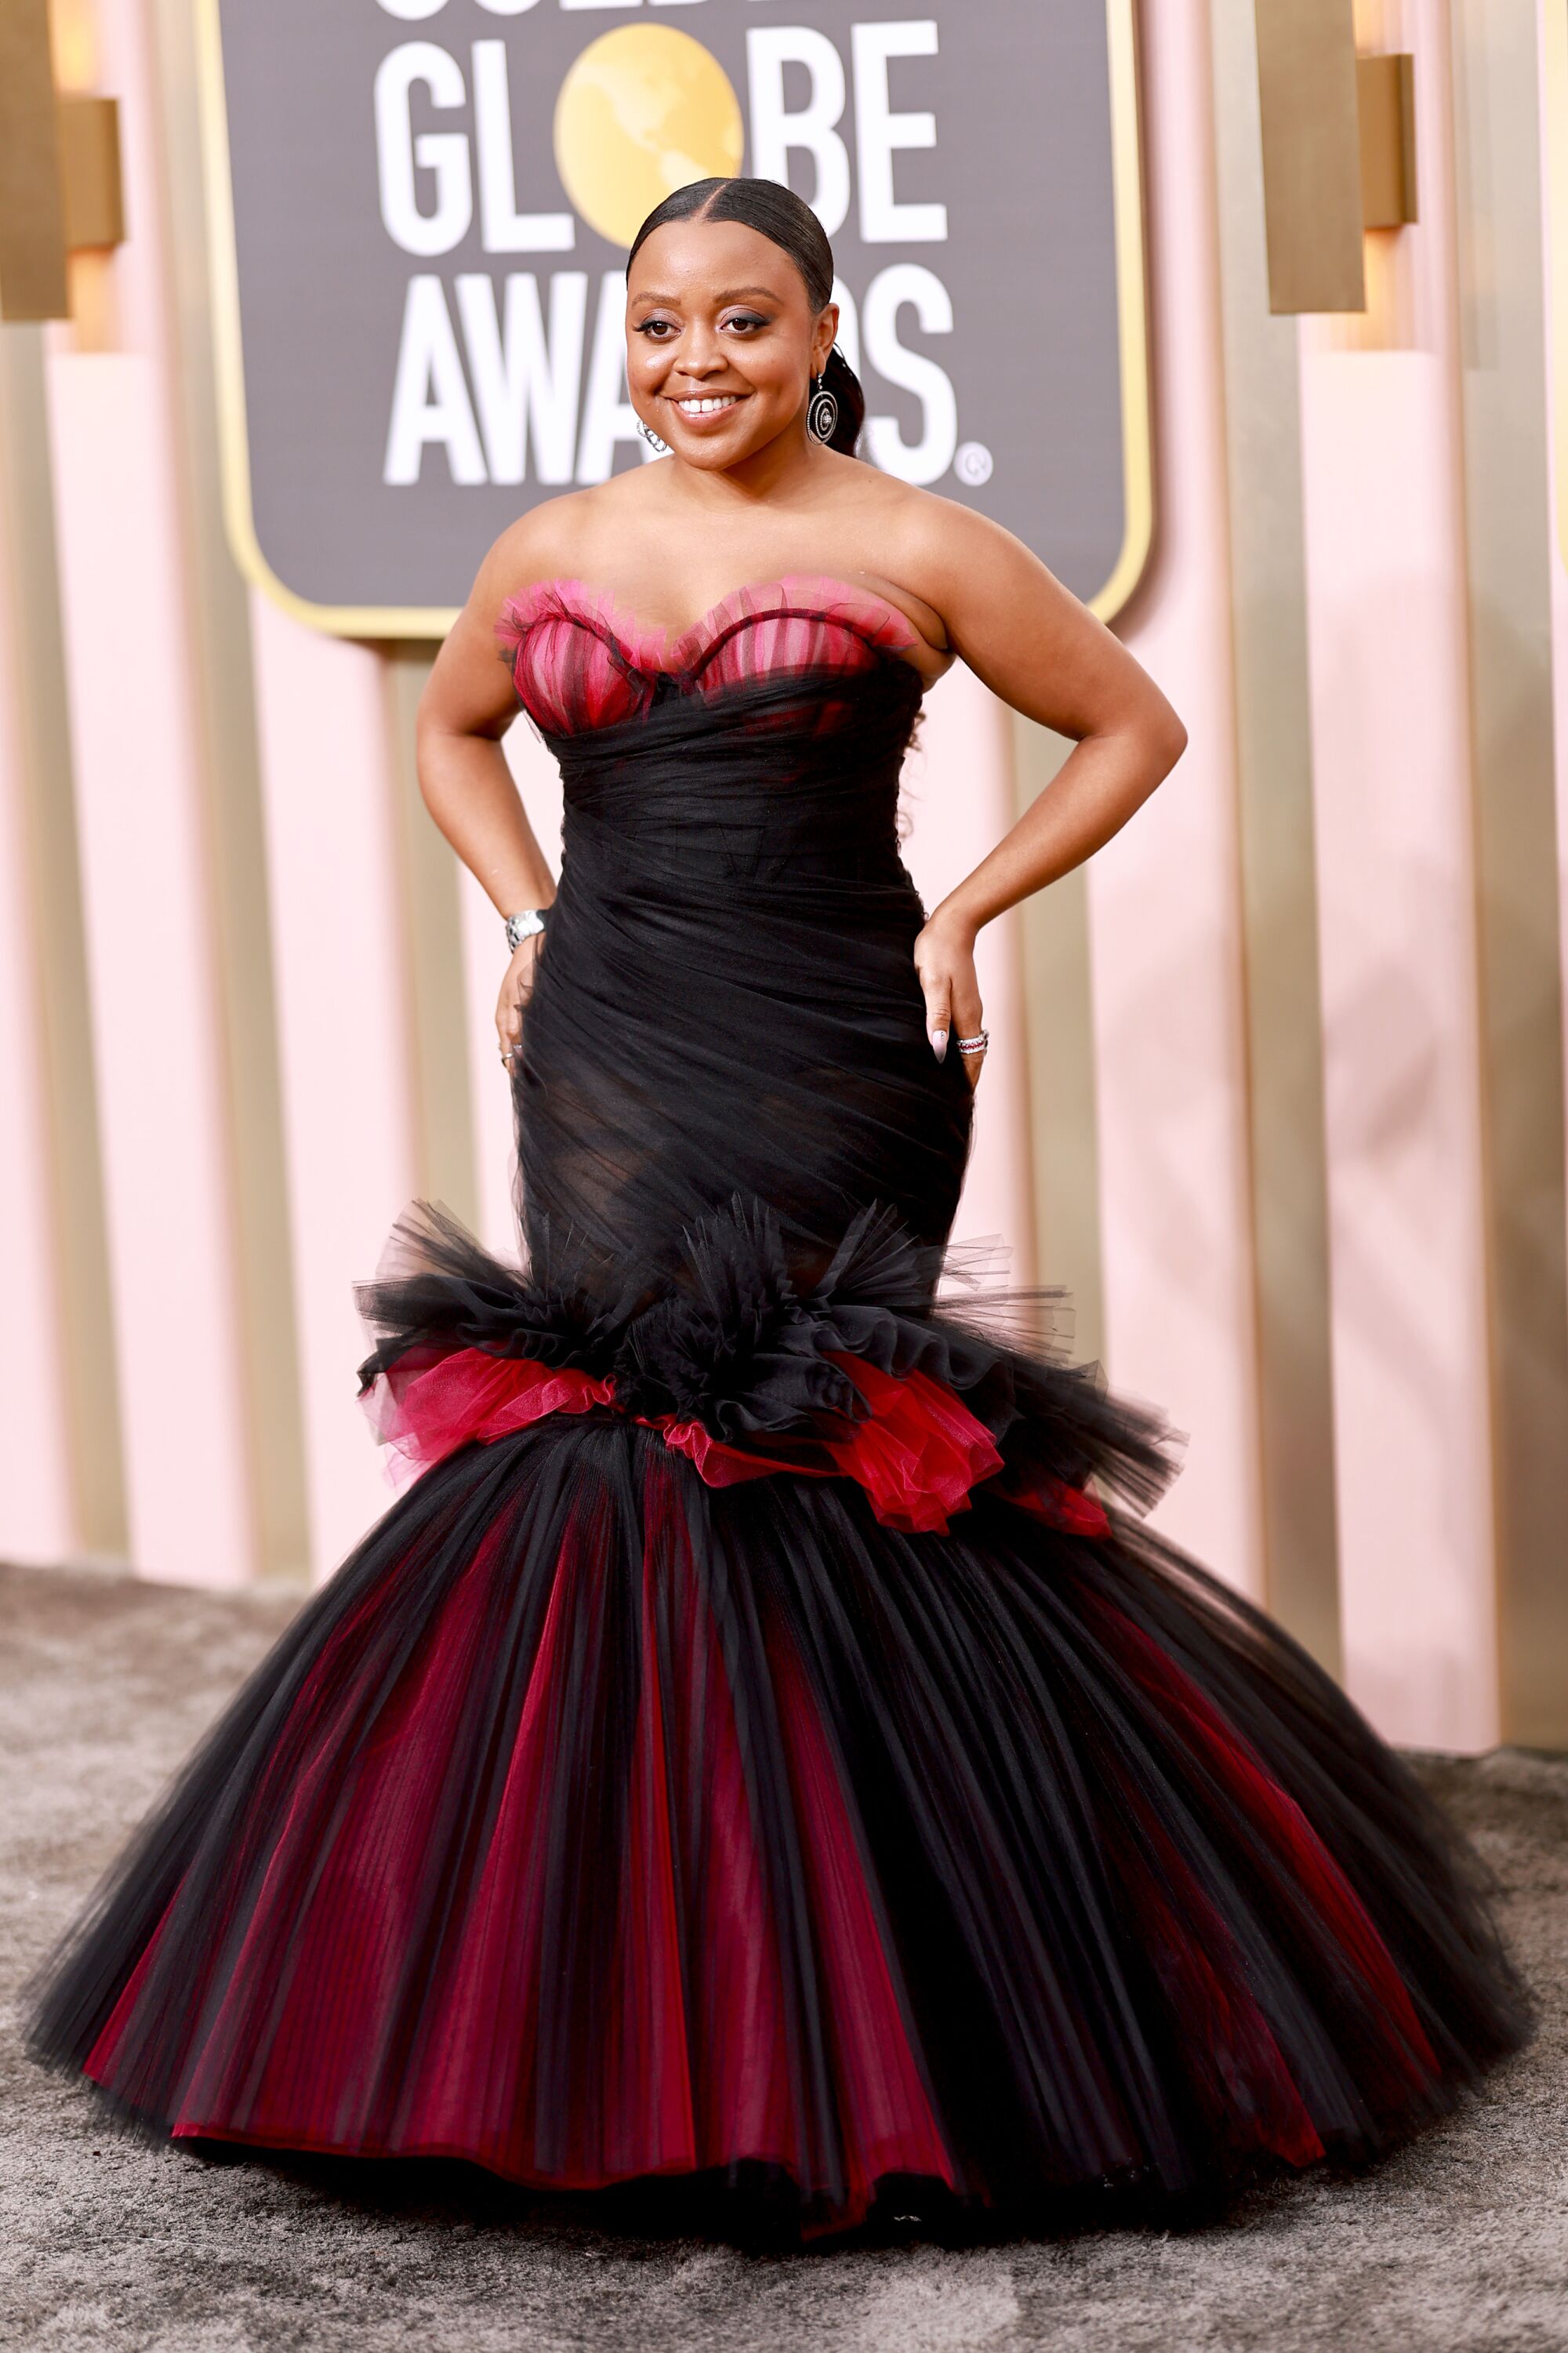 Quinta Brunson schools the Golden Globes in red carpet style.